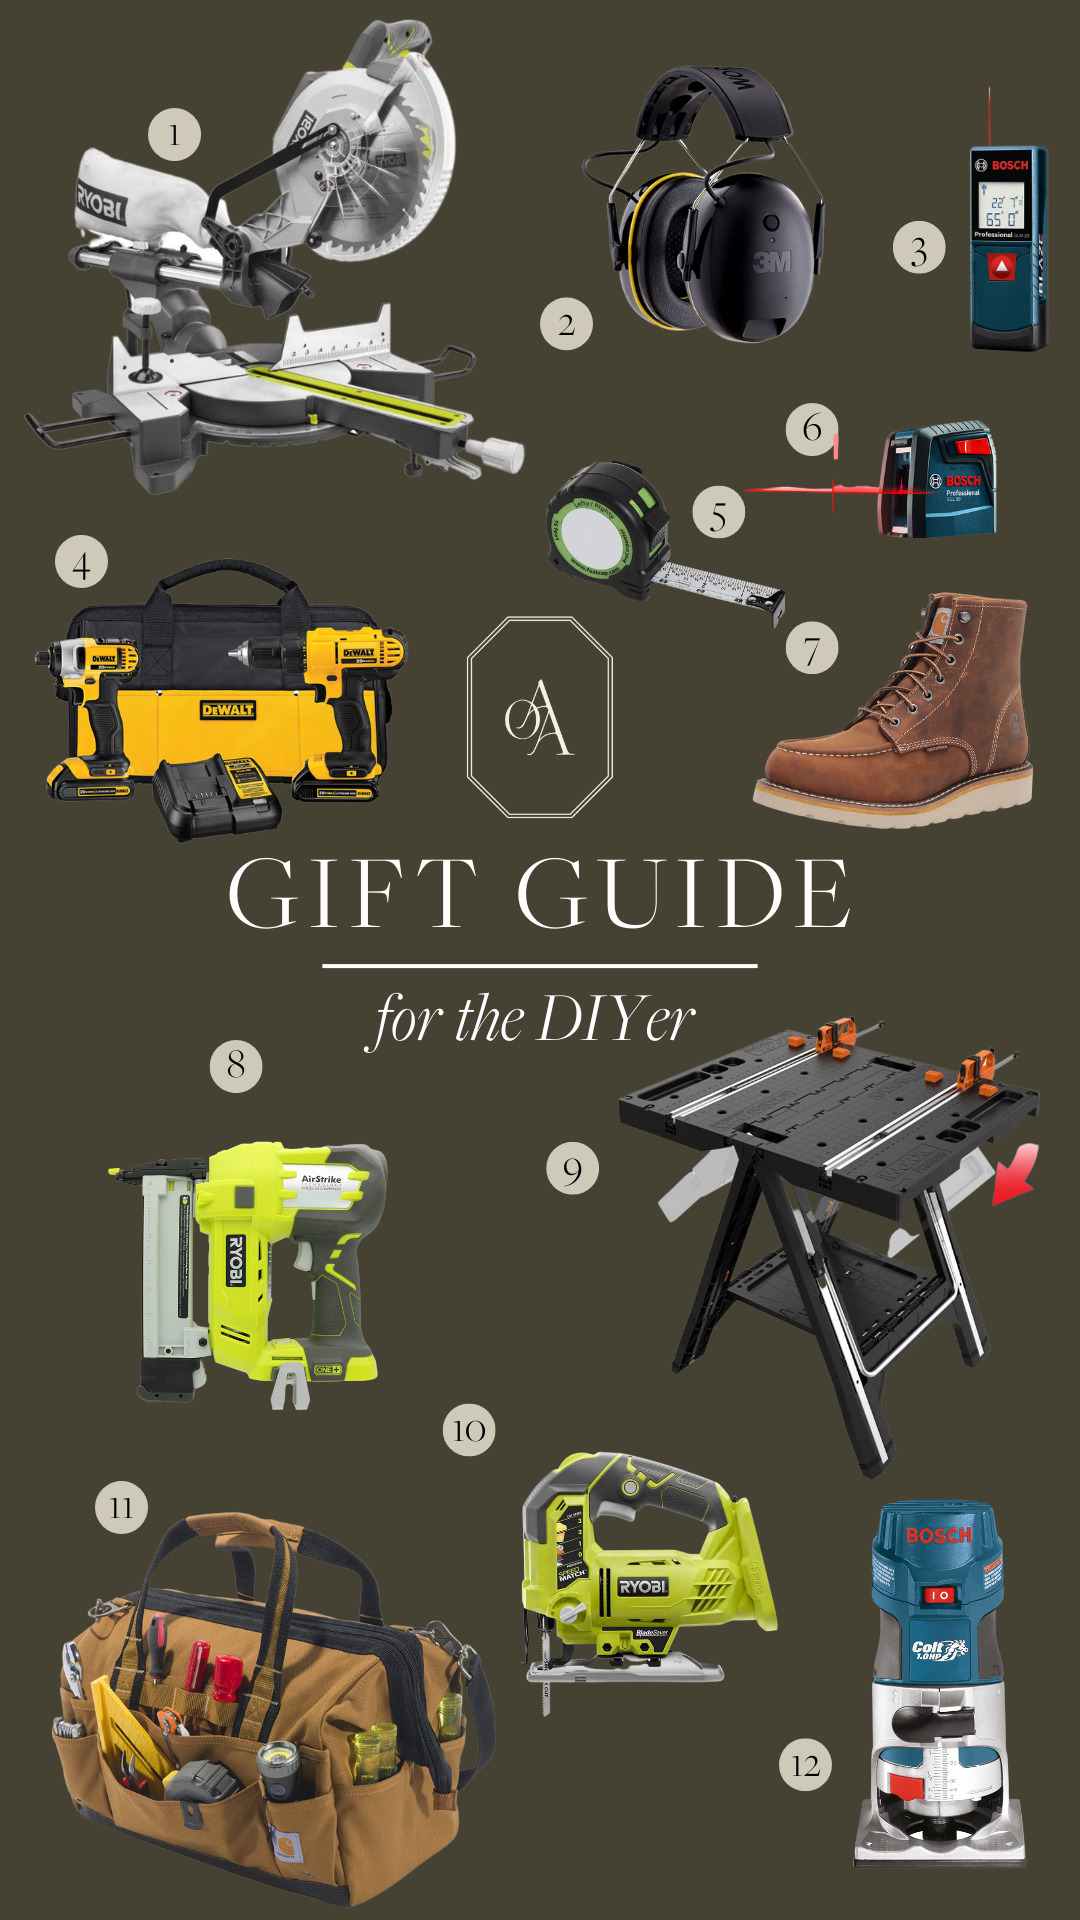 Best gift ideas for a DIYer